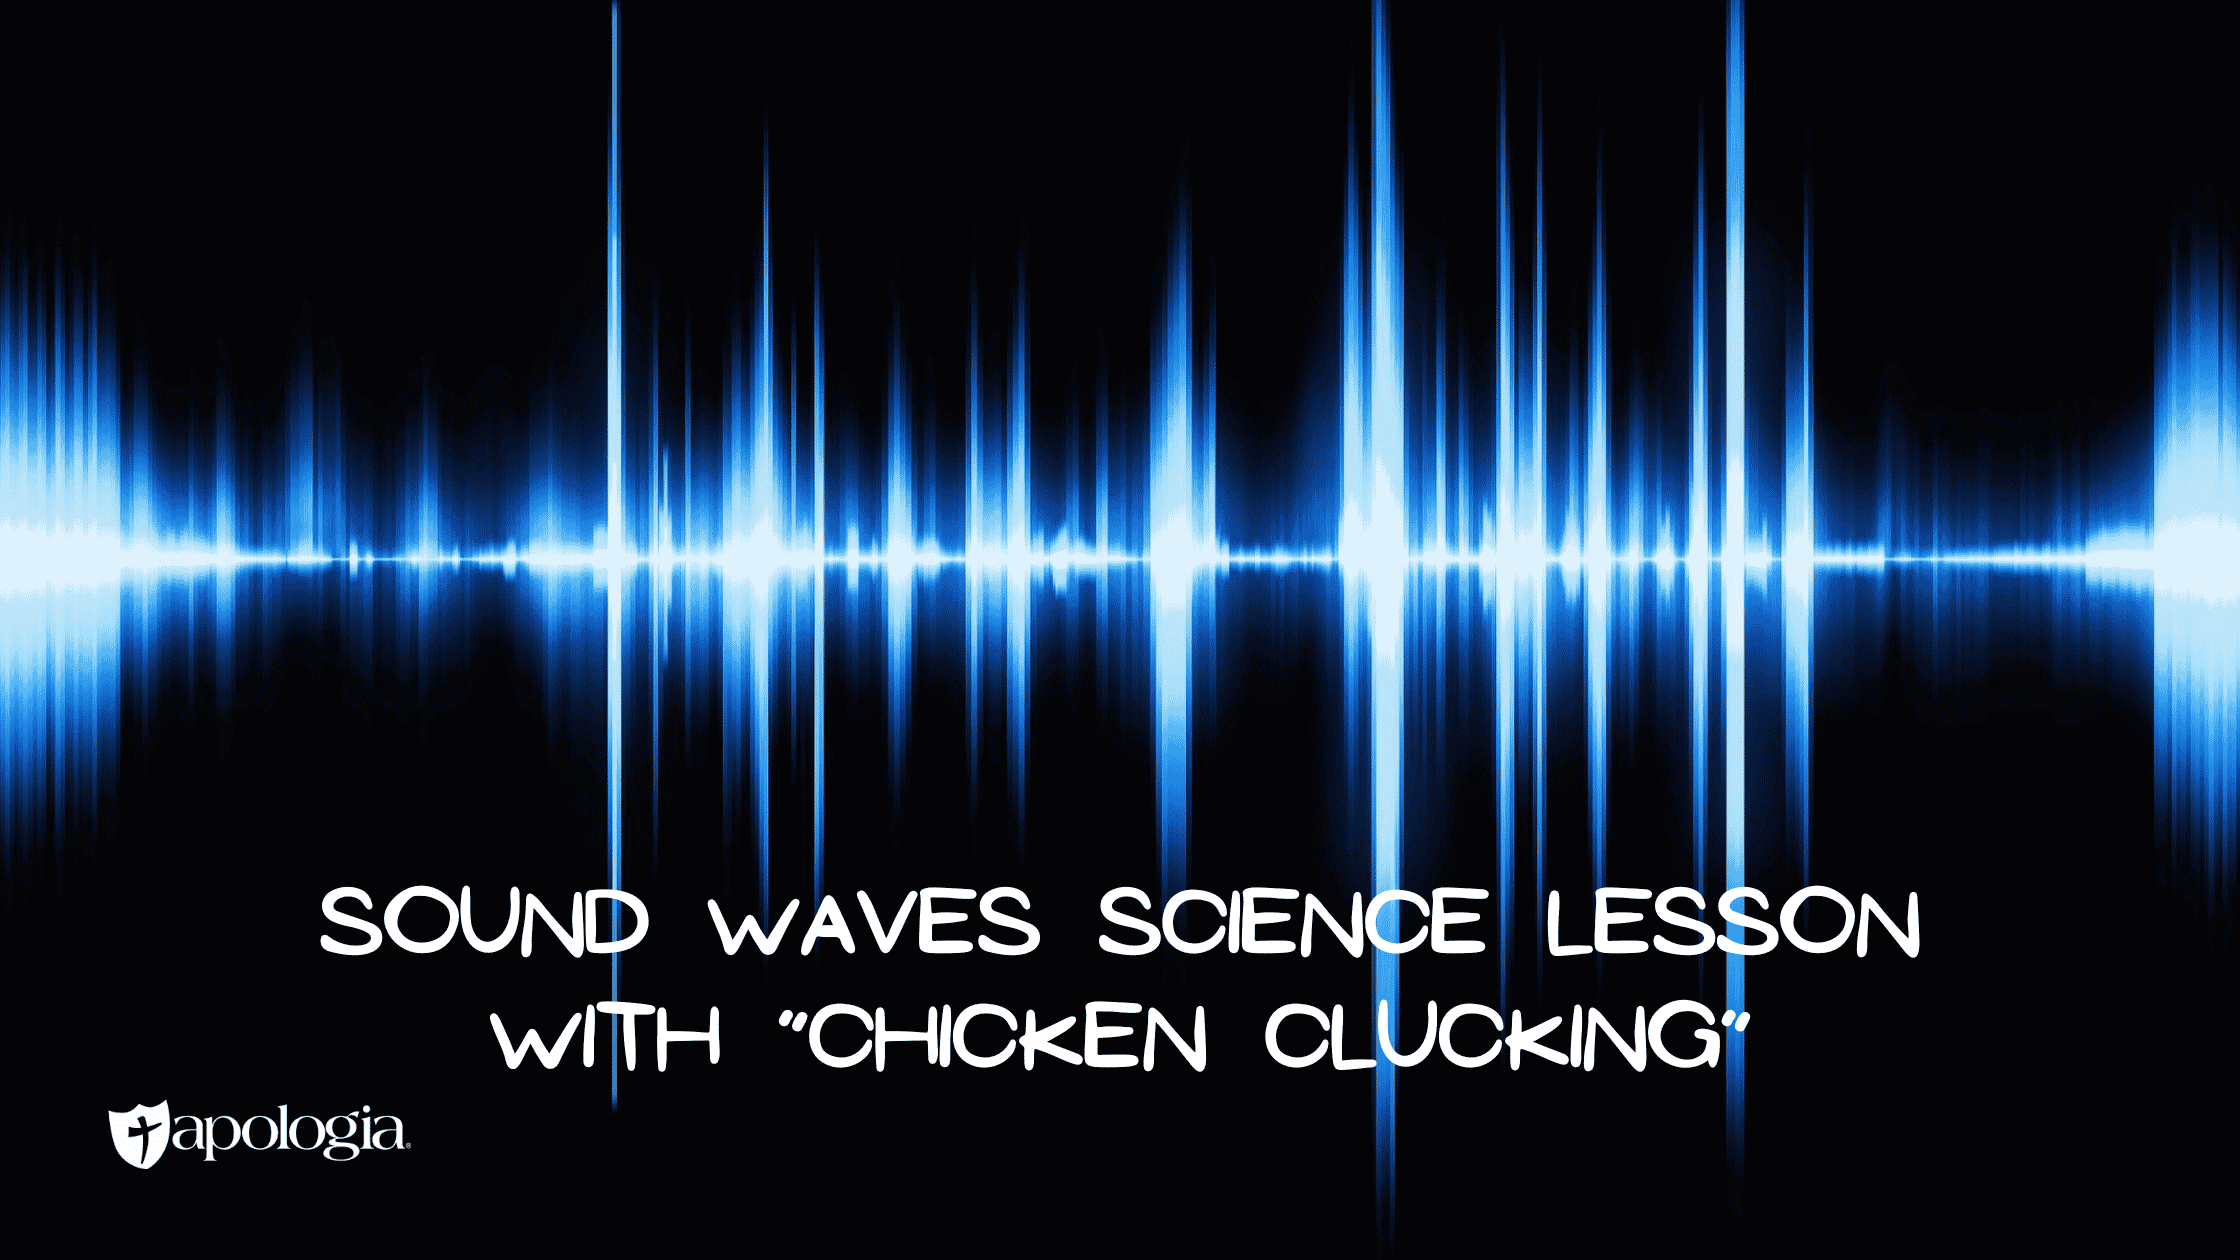 Sound Waves Science Lesson with “Chicken Clucking”